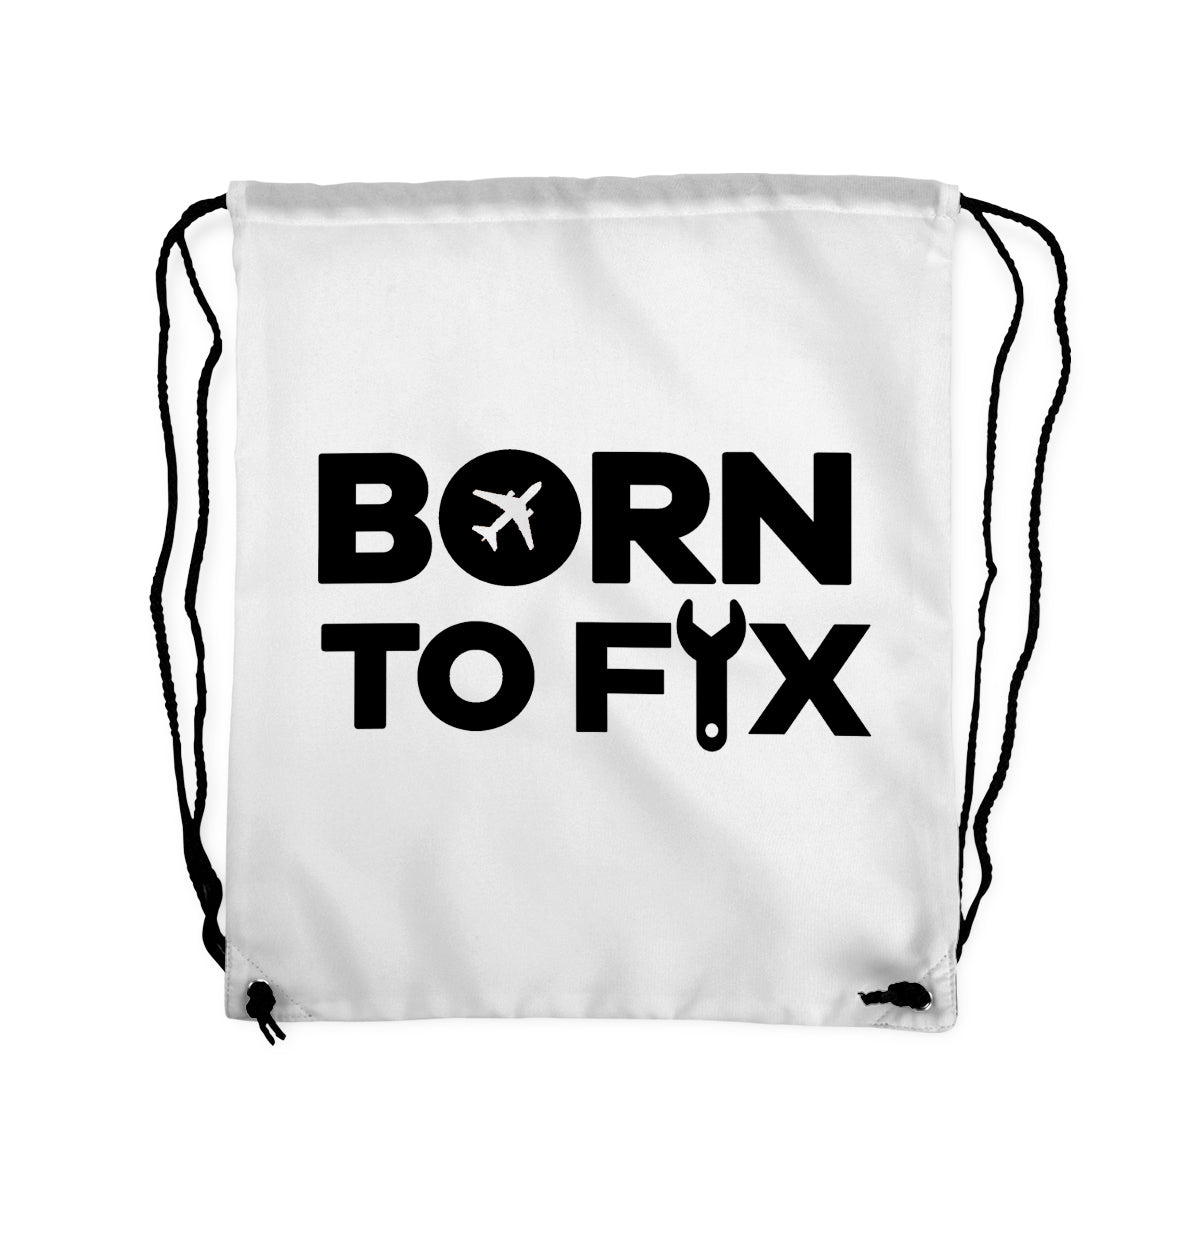 Born To Fix Airplanes Designed Drawstring Bags